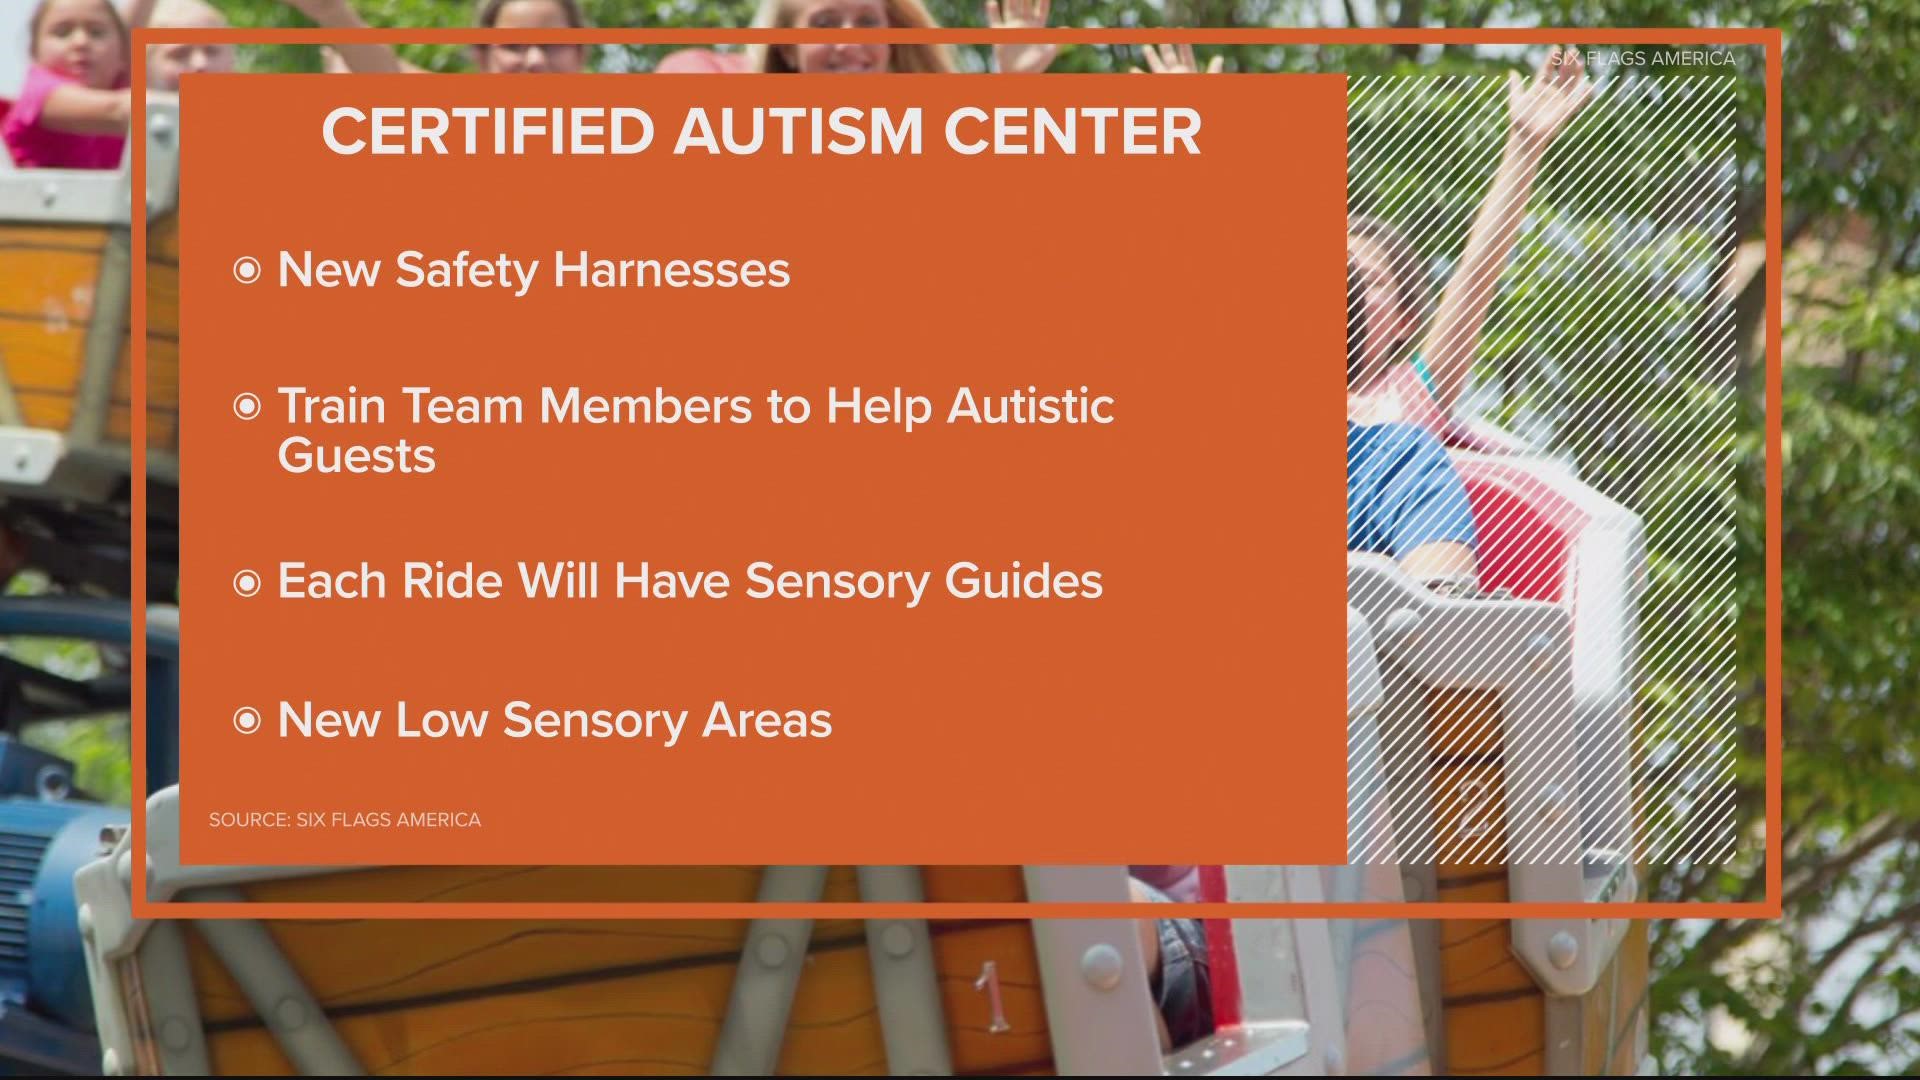 Six Flags is the first amusement park in the DC region to be named a Certified Autism Center.